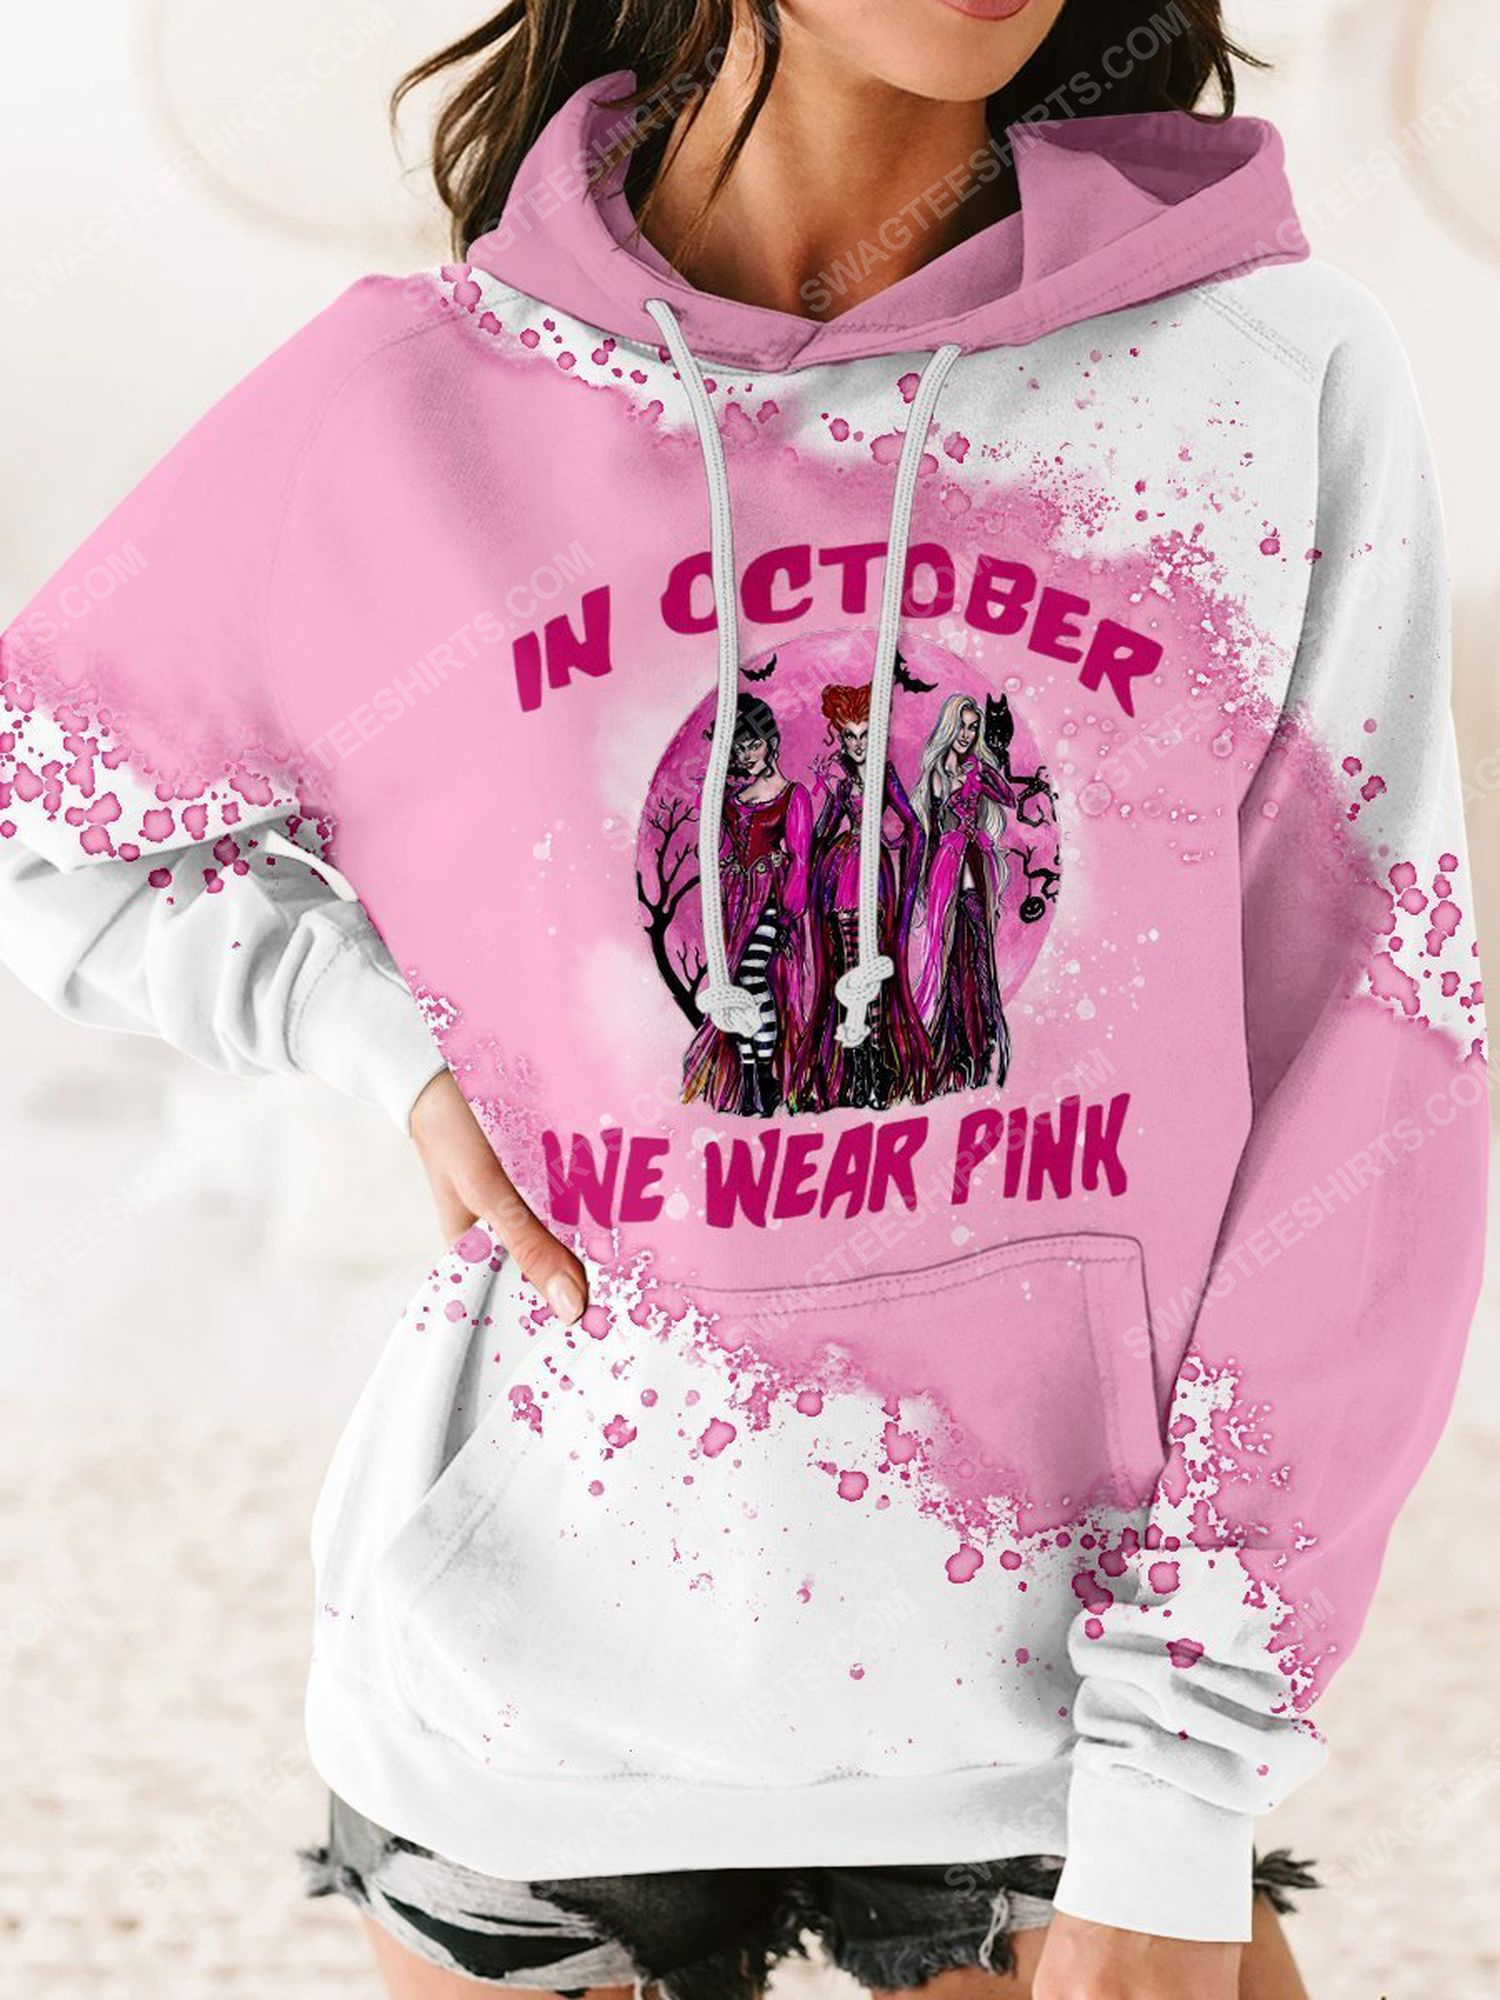 Breast cancer in october we wear pink hocus pocus witch full print shirt 1 - Copy